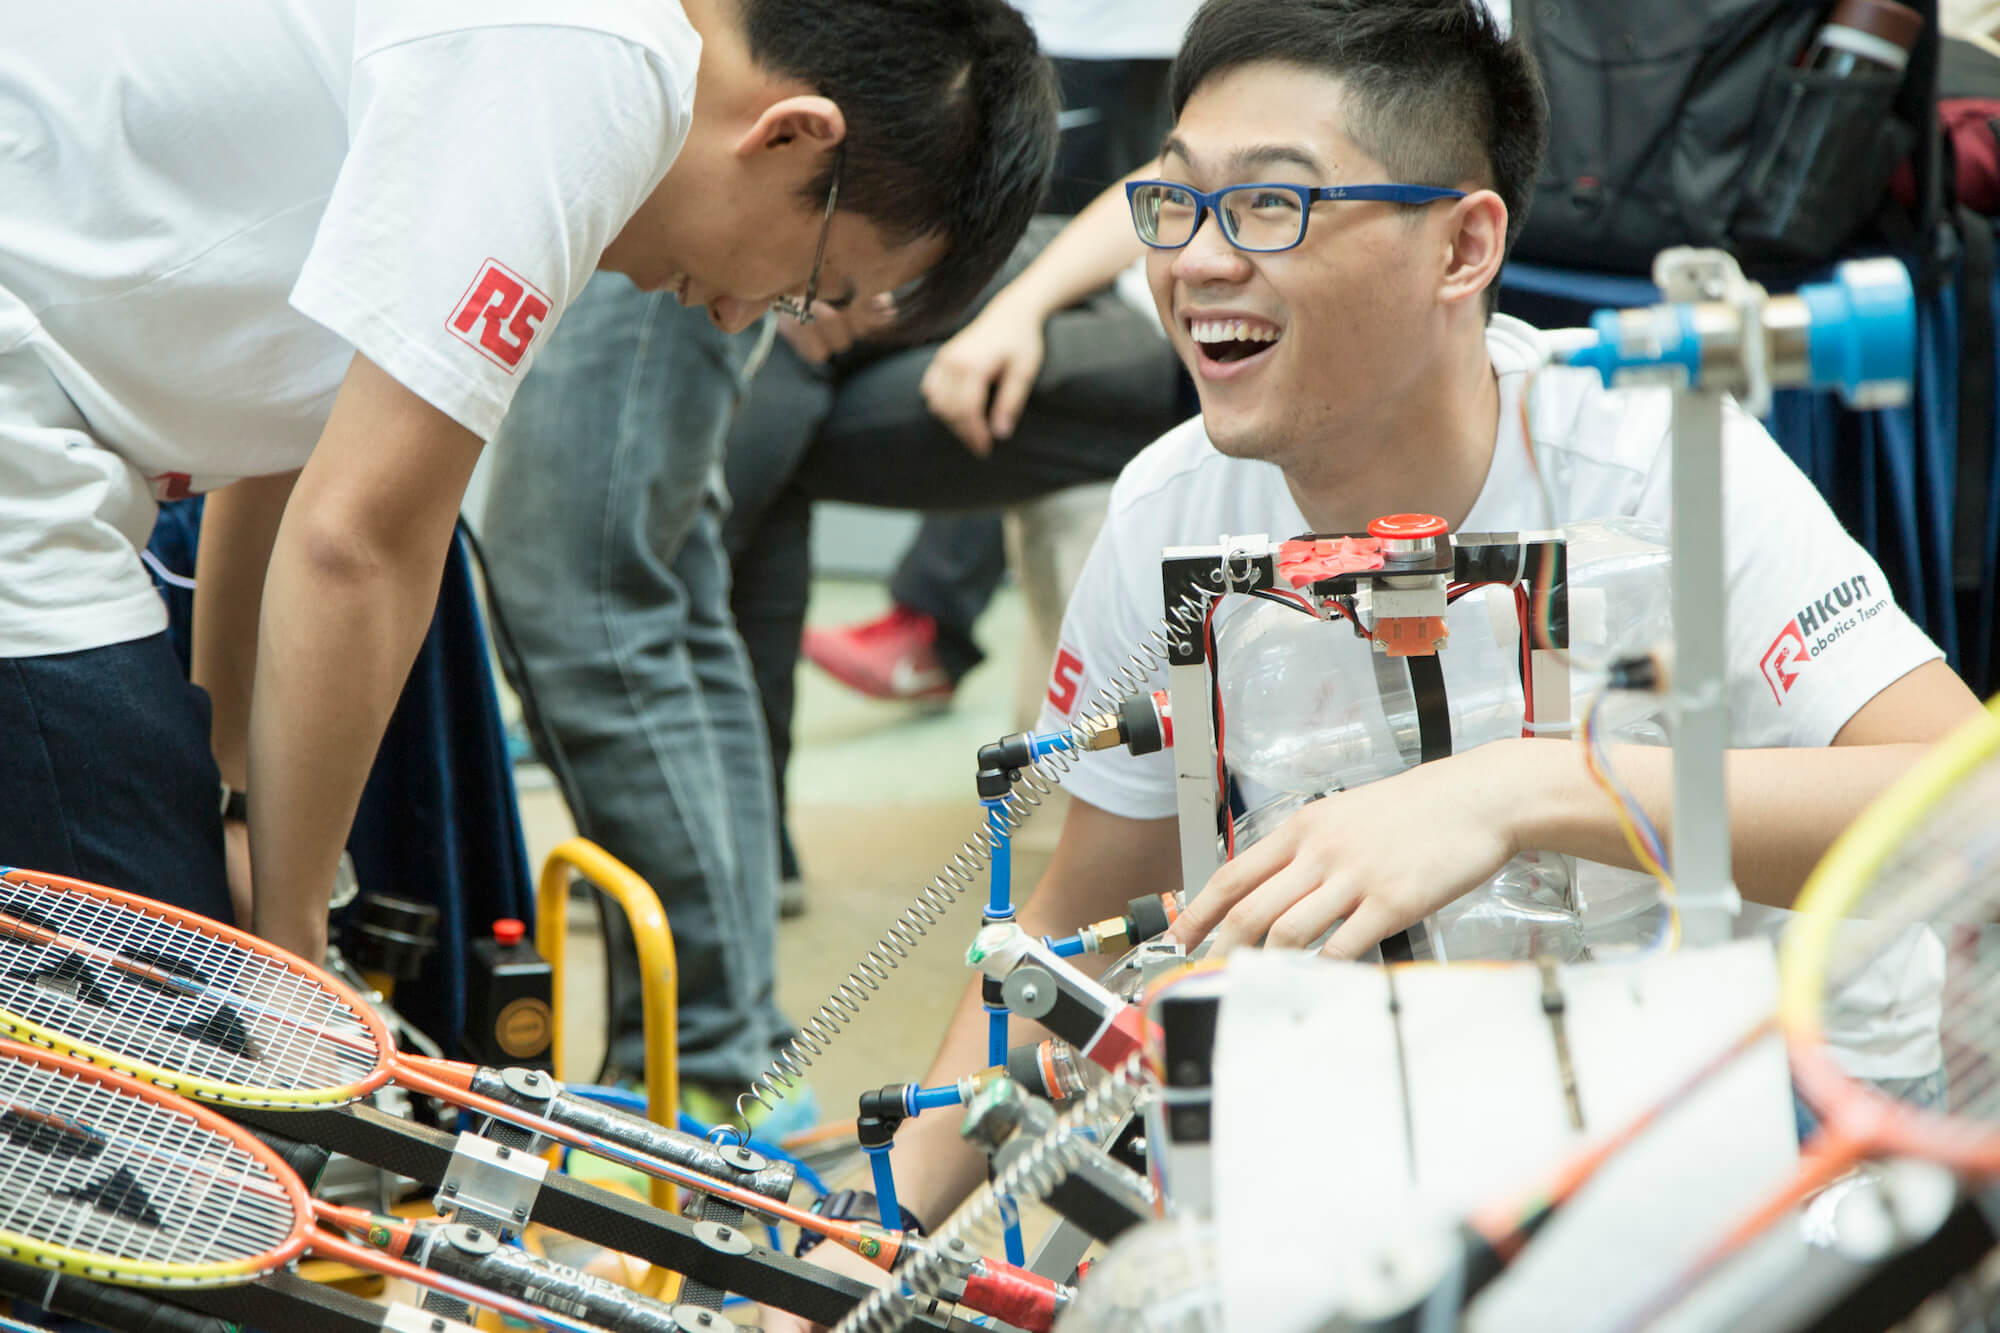 Annual 'Robocon' sponsored by RS at HKUST, Hong Kong. June 2015